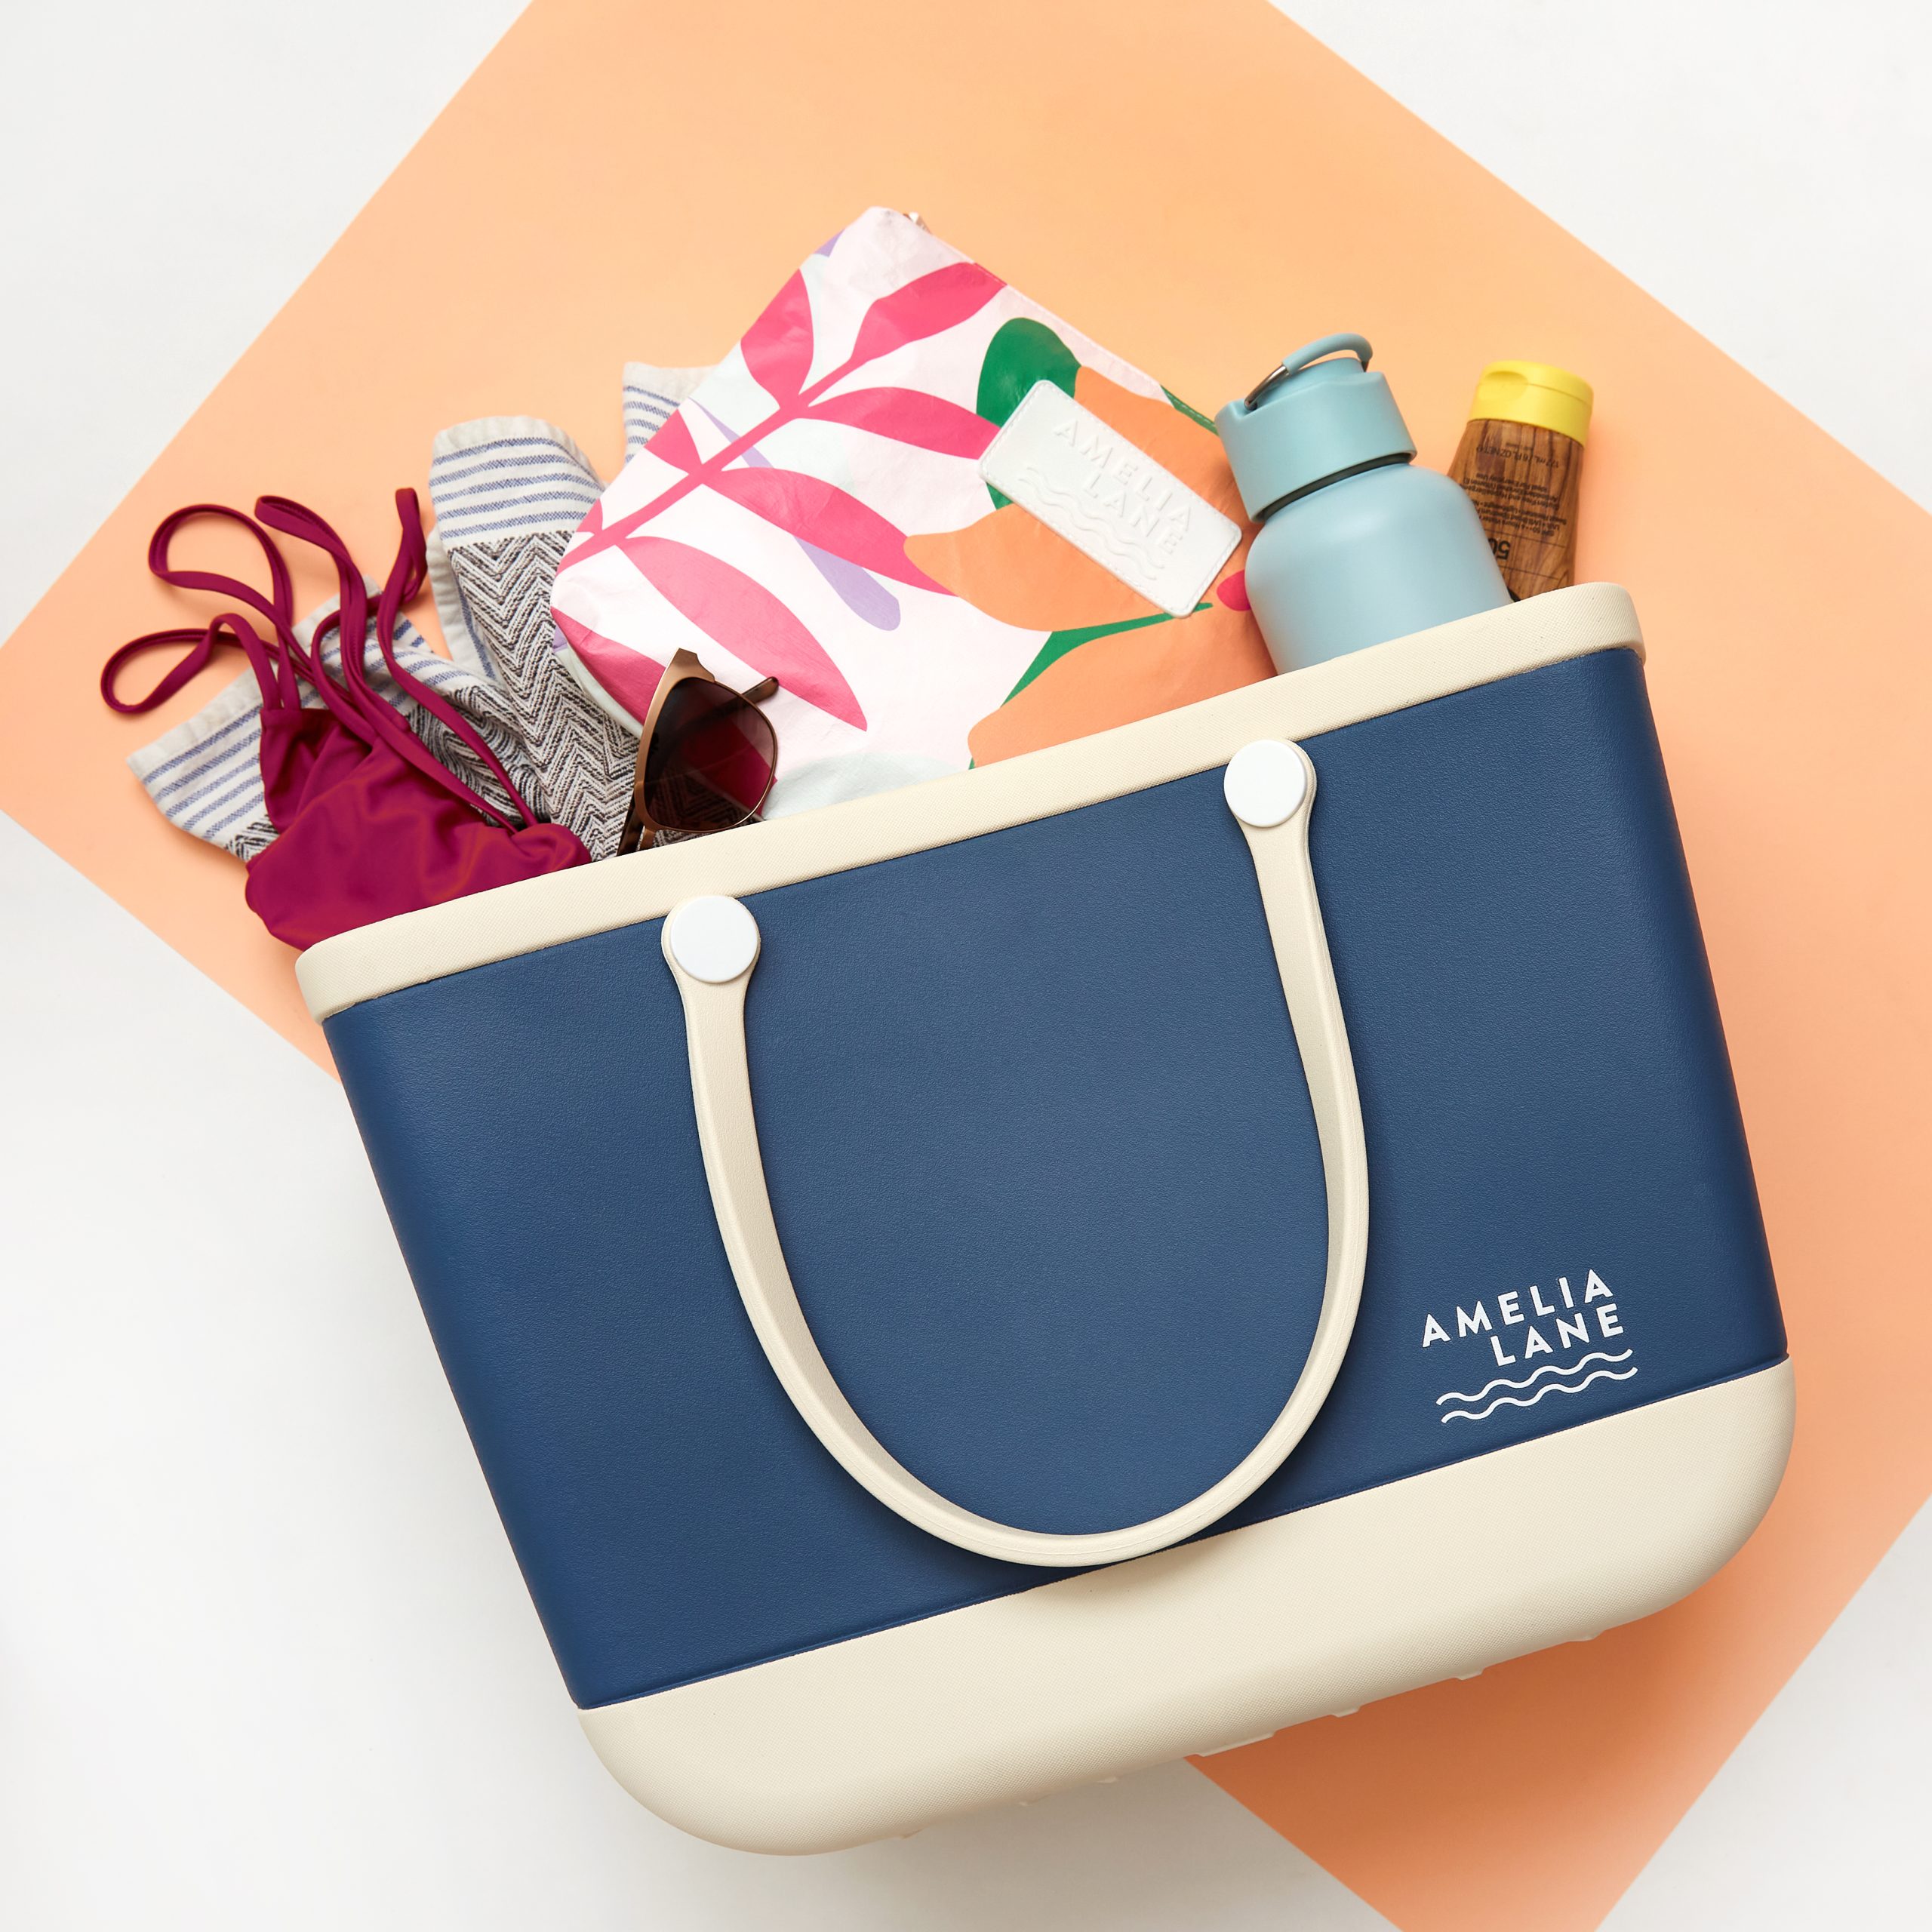 New Style of Beach Bag set to Revolutionise Summer | Façon